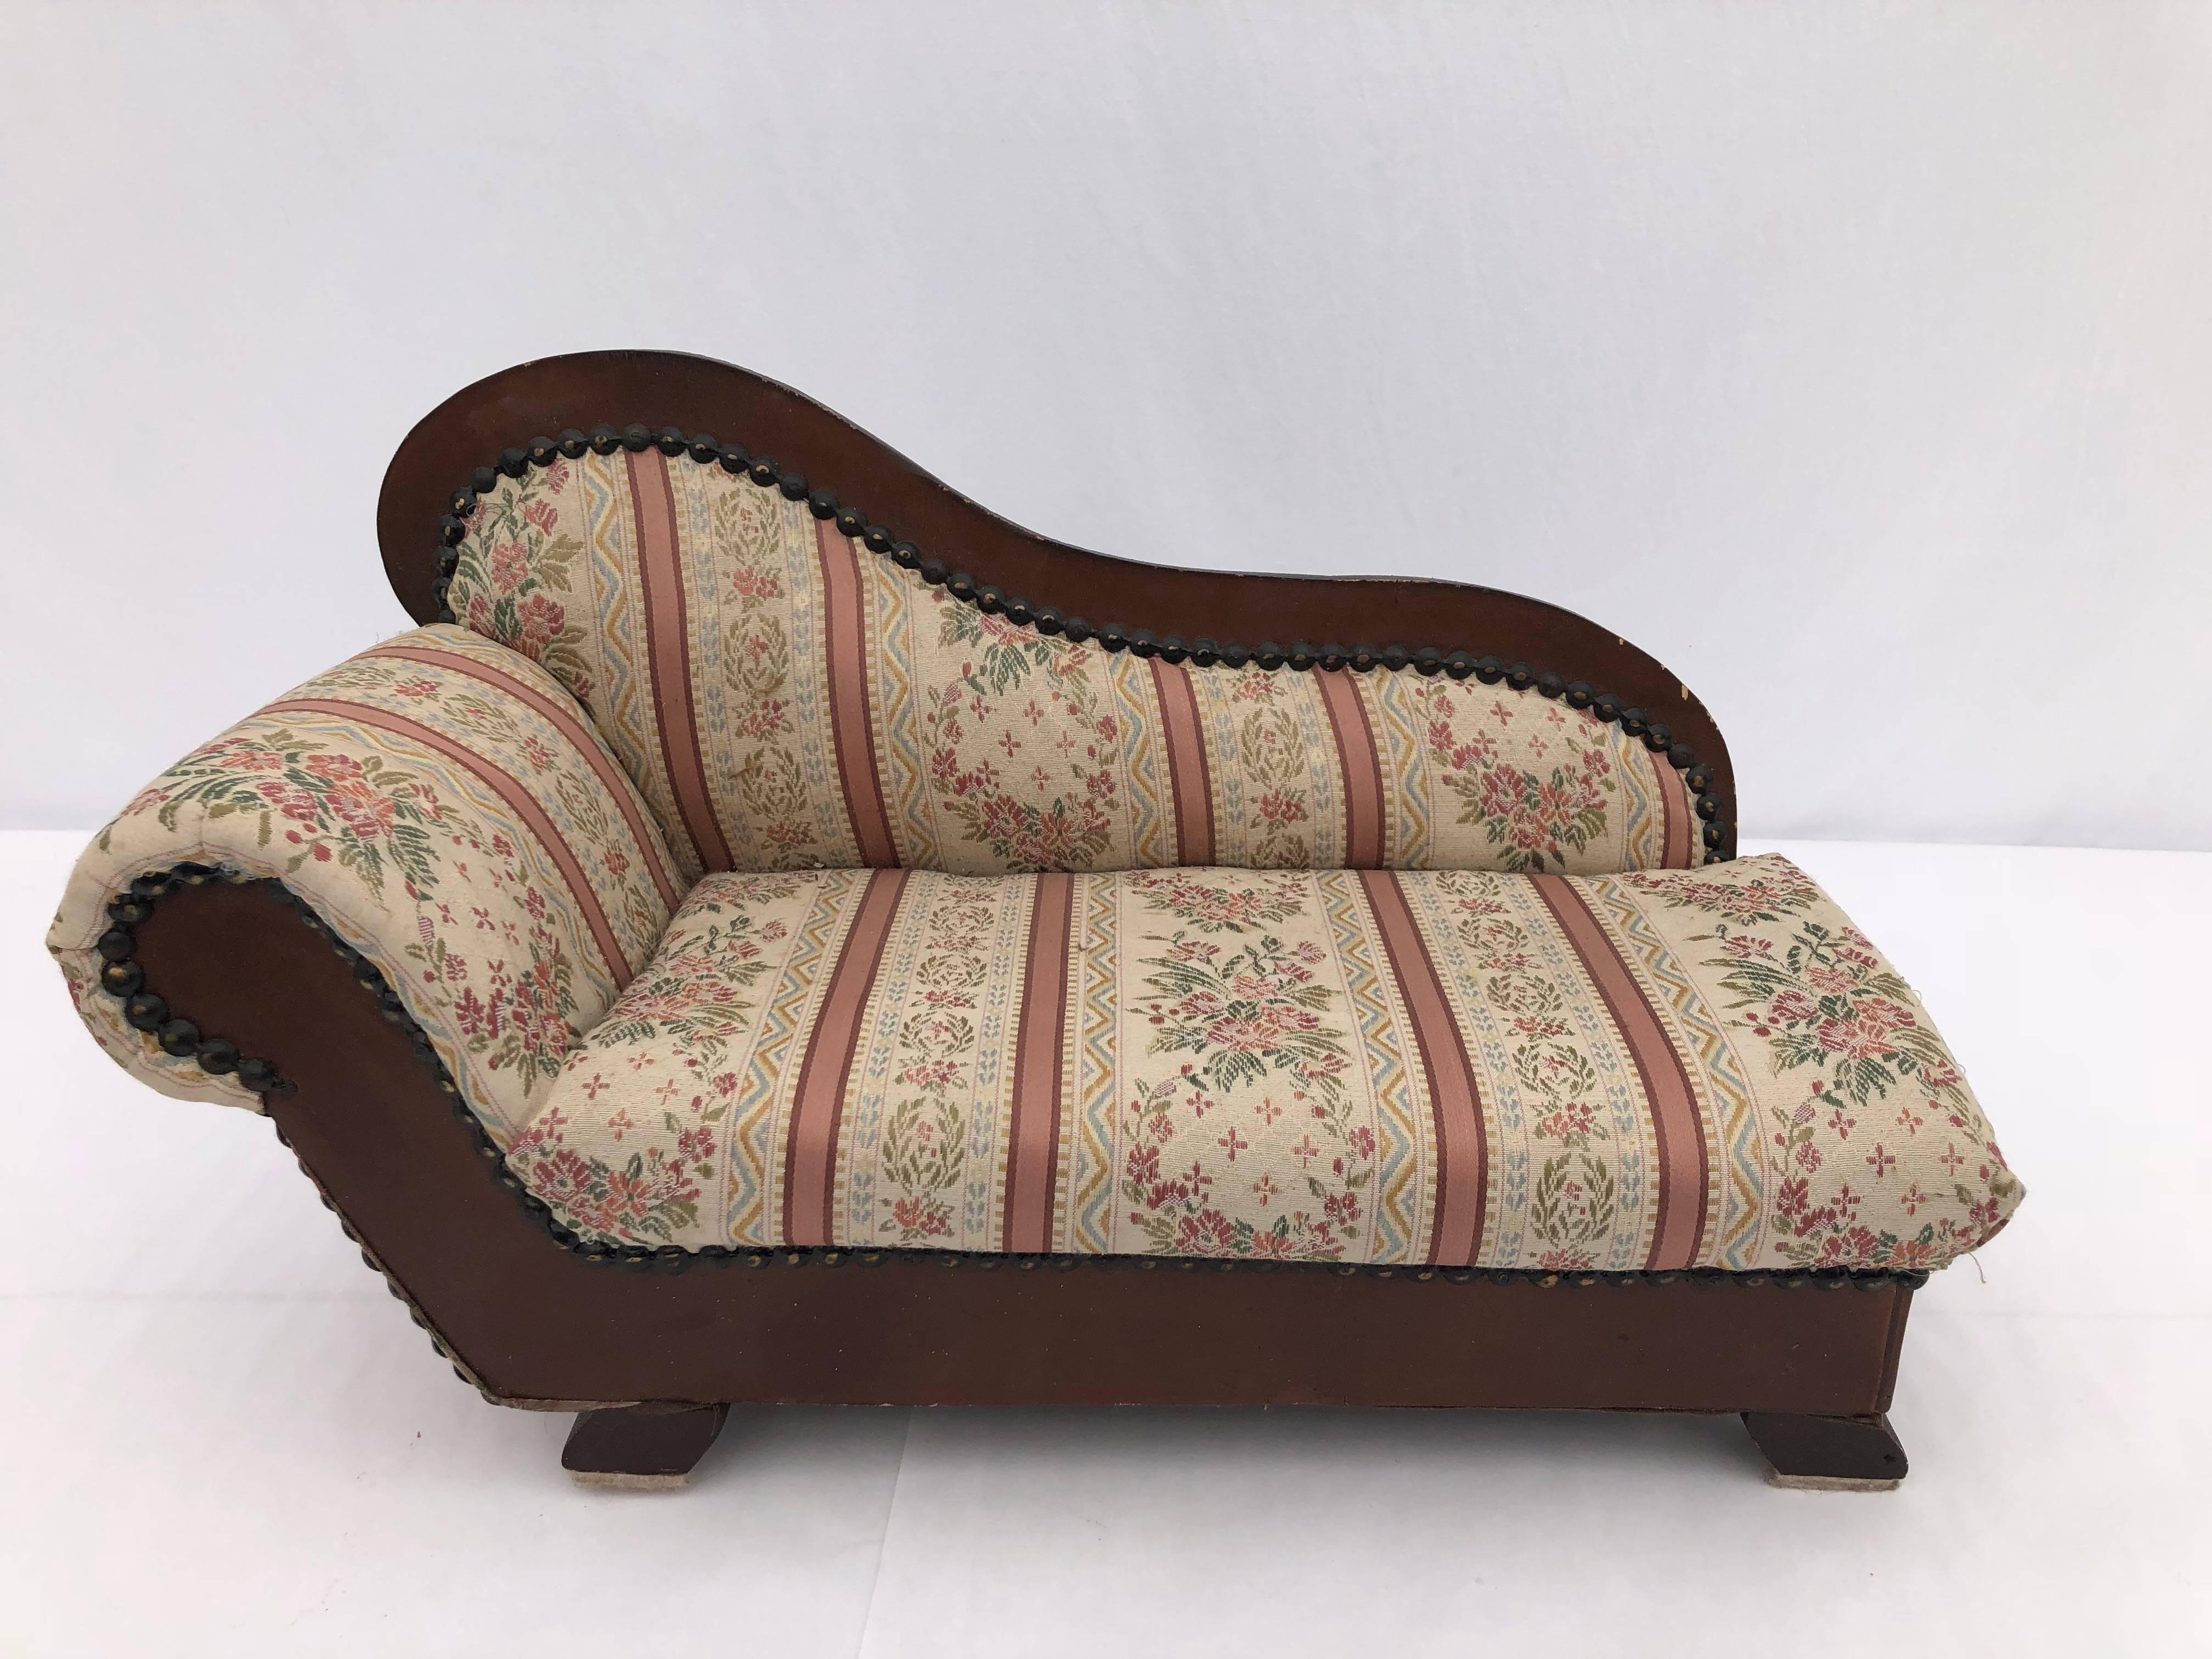 This is a lovely French doll sofa with great detail. It is in wood with beautiful silk fabric and fabric tacks.